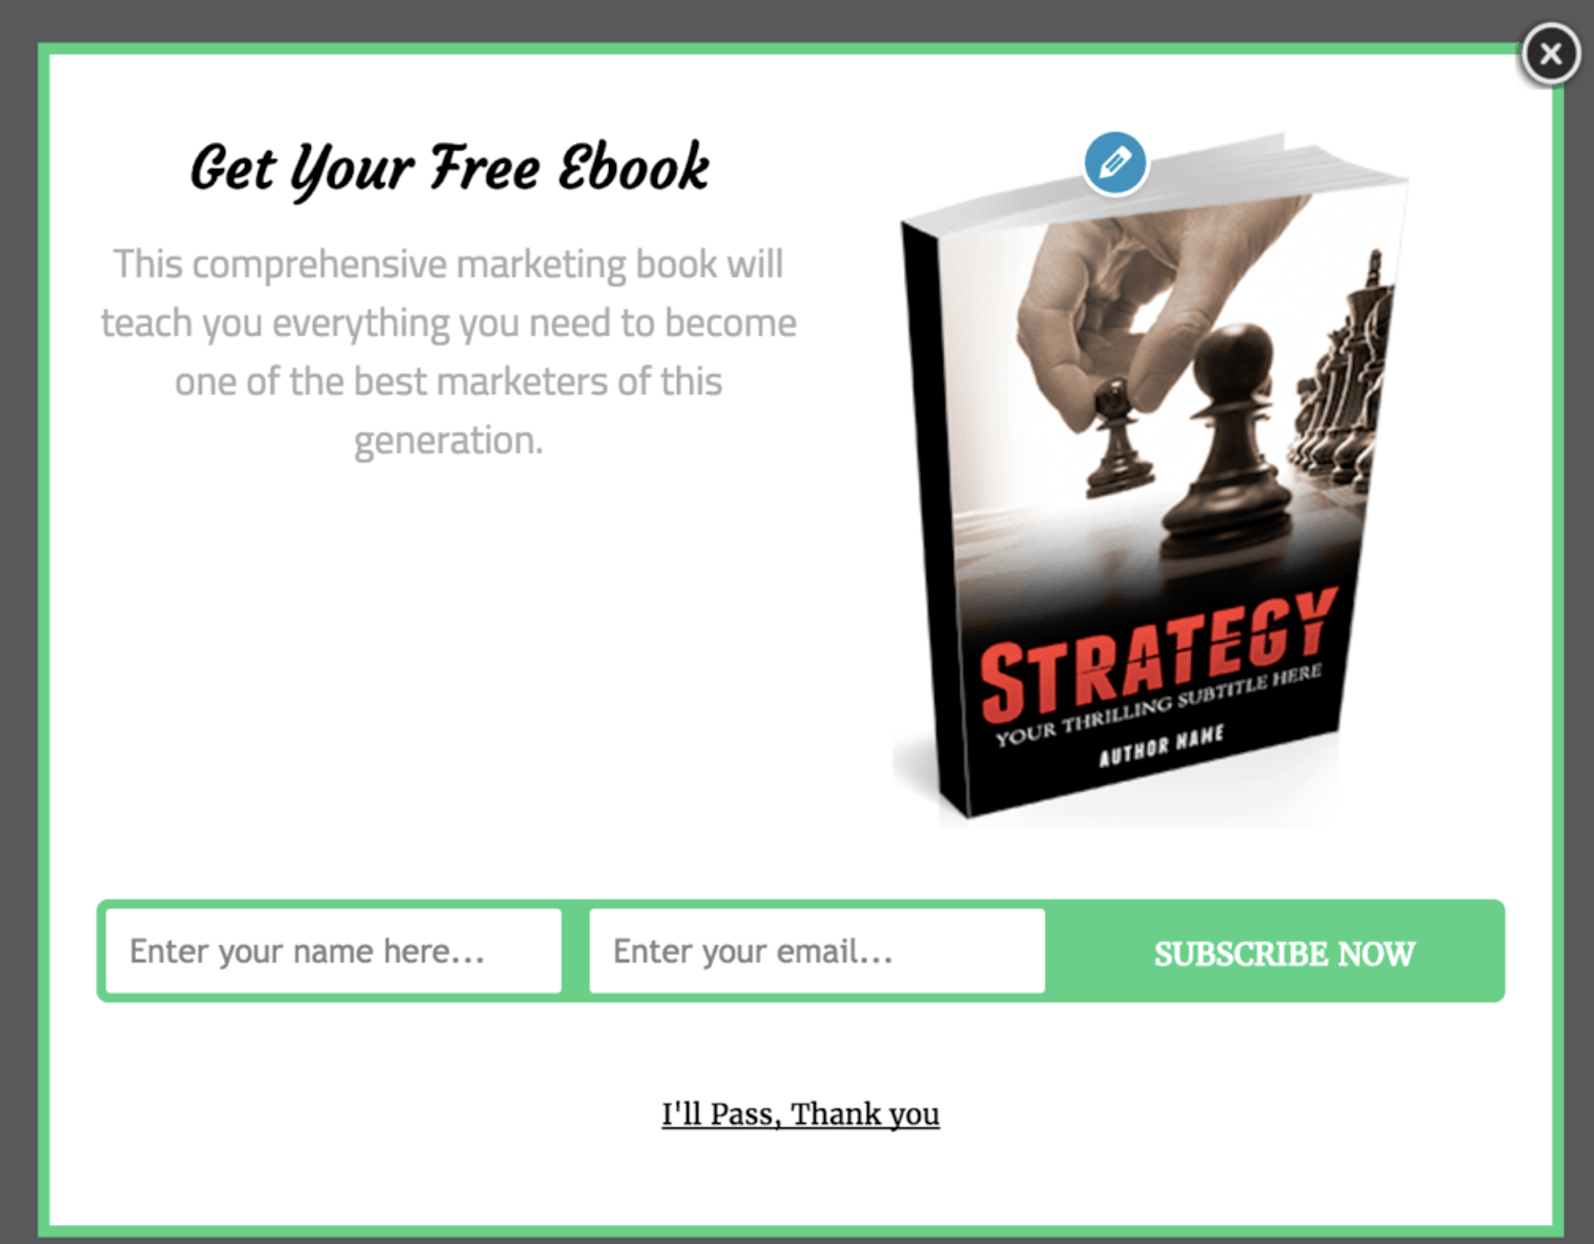 example of free gift in opt in email form